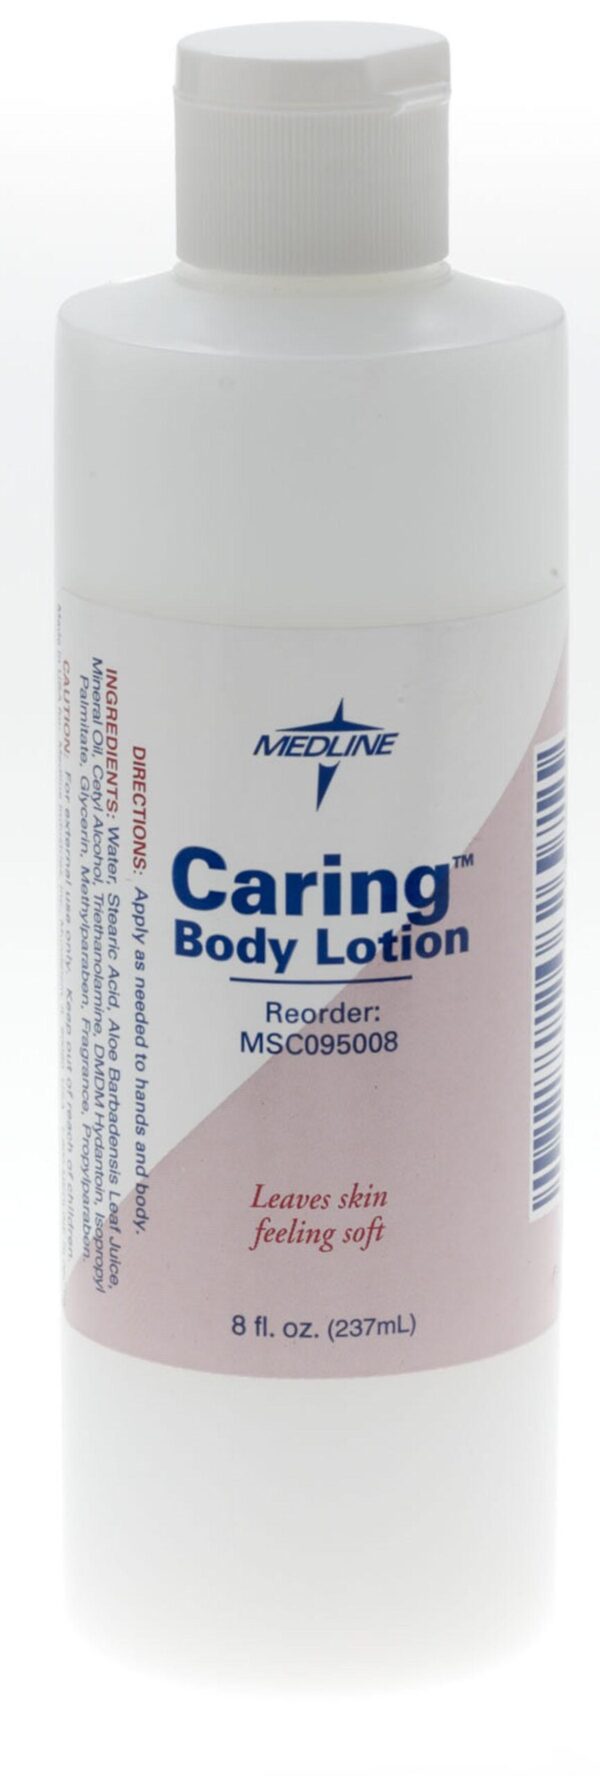 Caring Body Lotion,White,8.000 OZ Case of 48